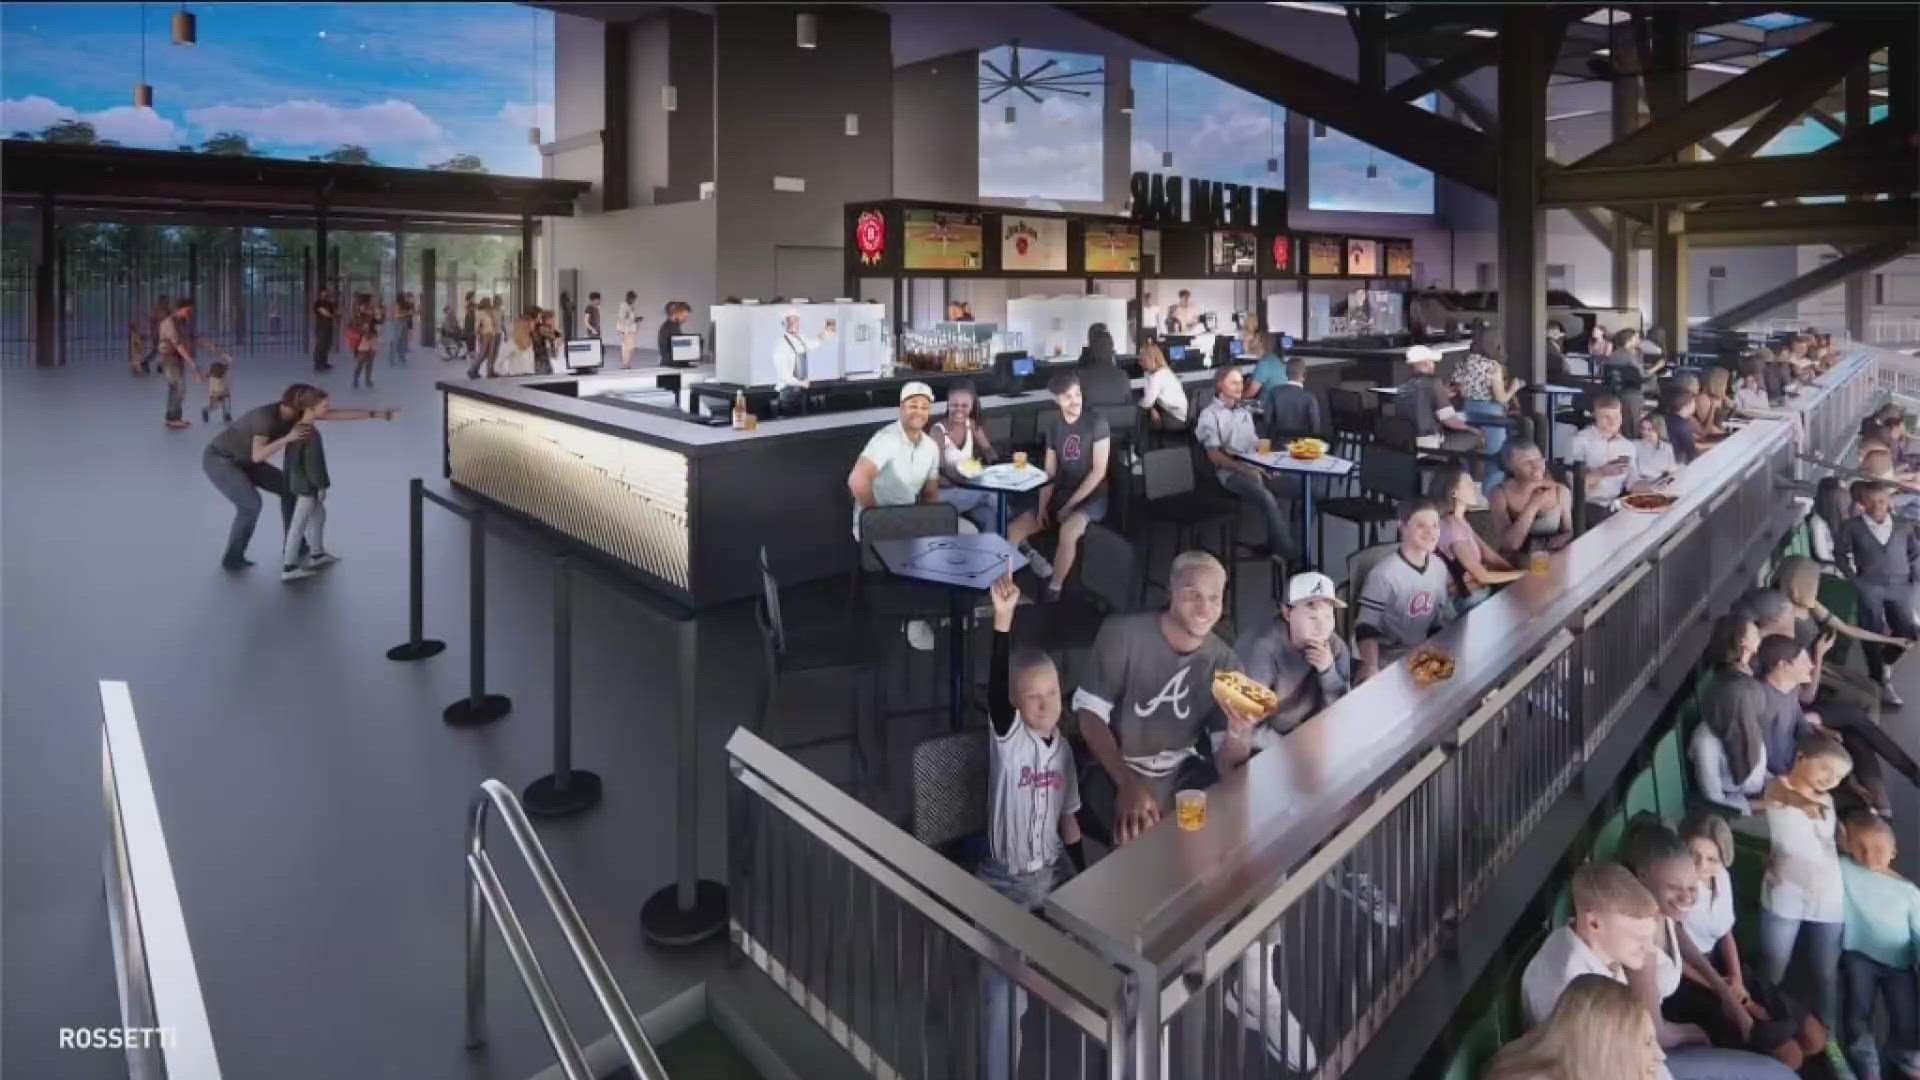 With an initial investment of $10 million, this multi-phase project promises new group seating, hospitality areas, concessions and retail spaces.